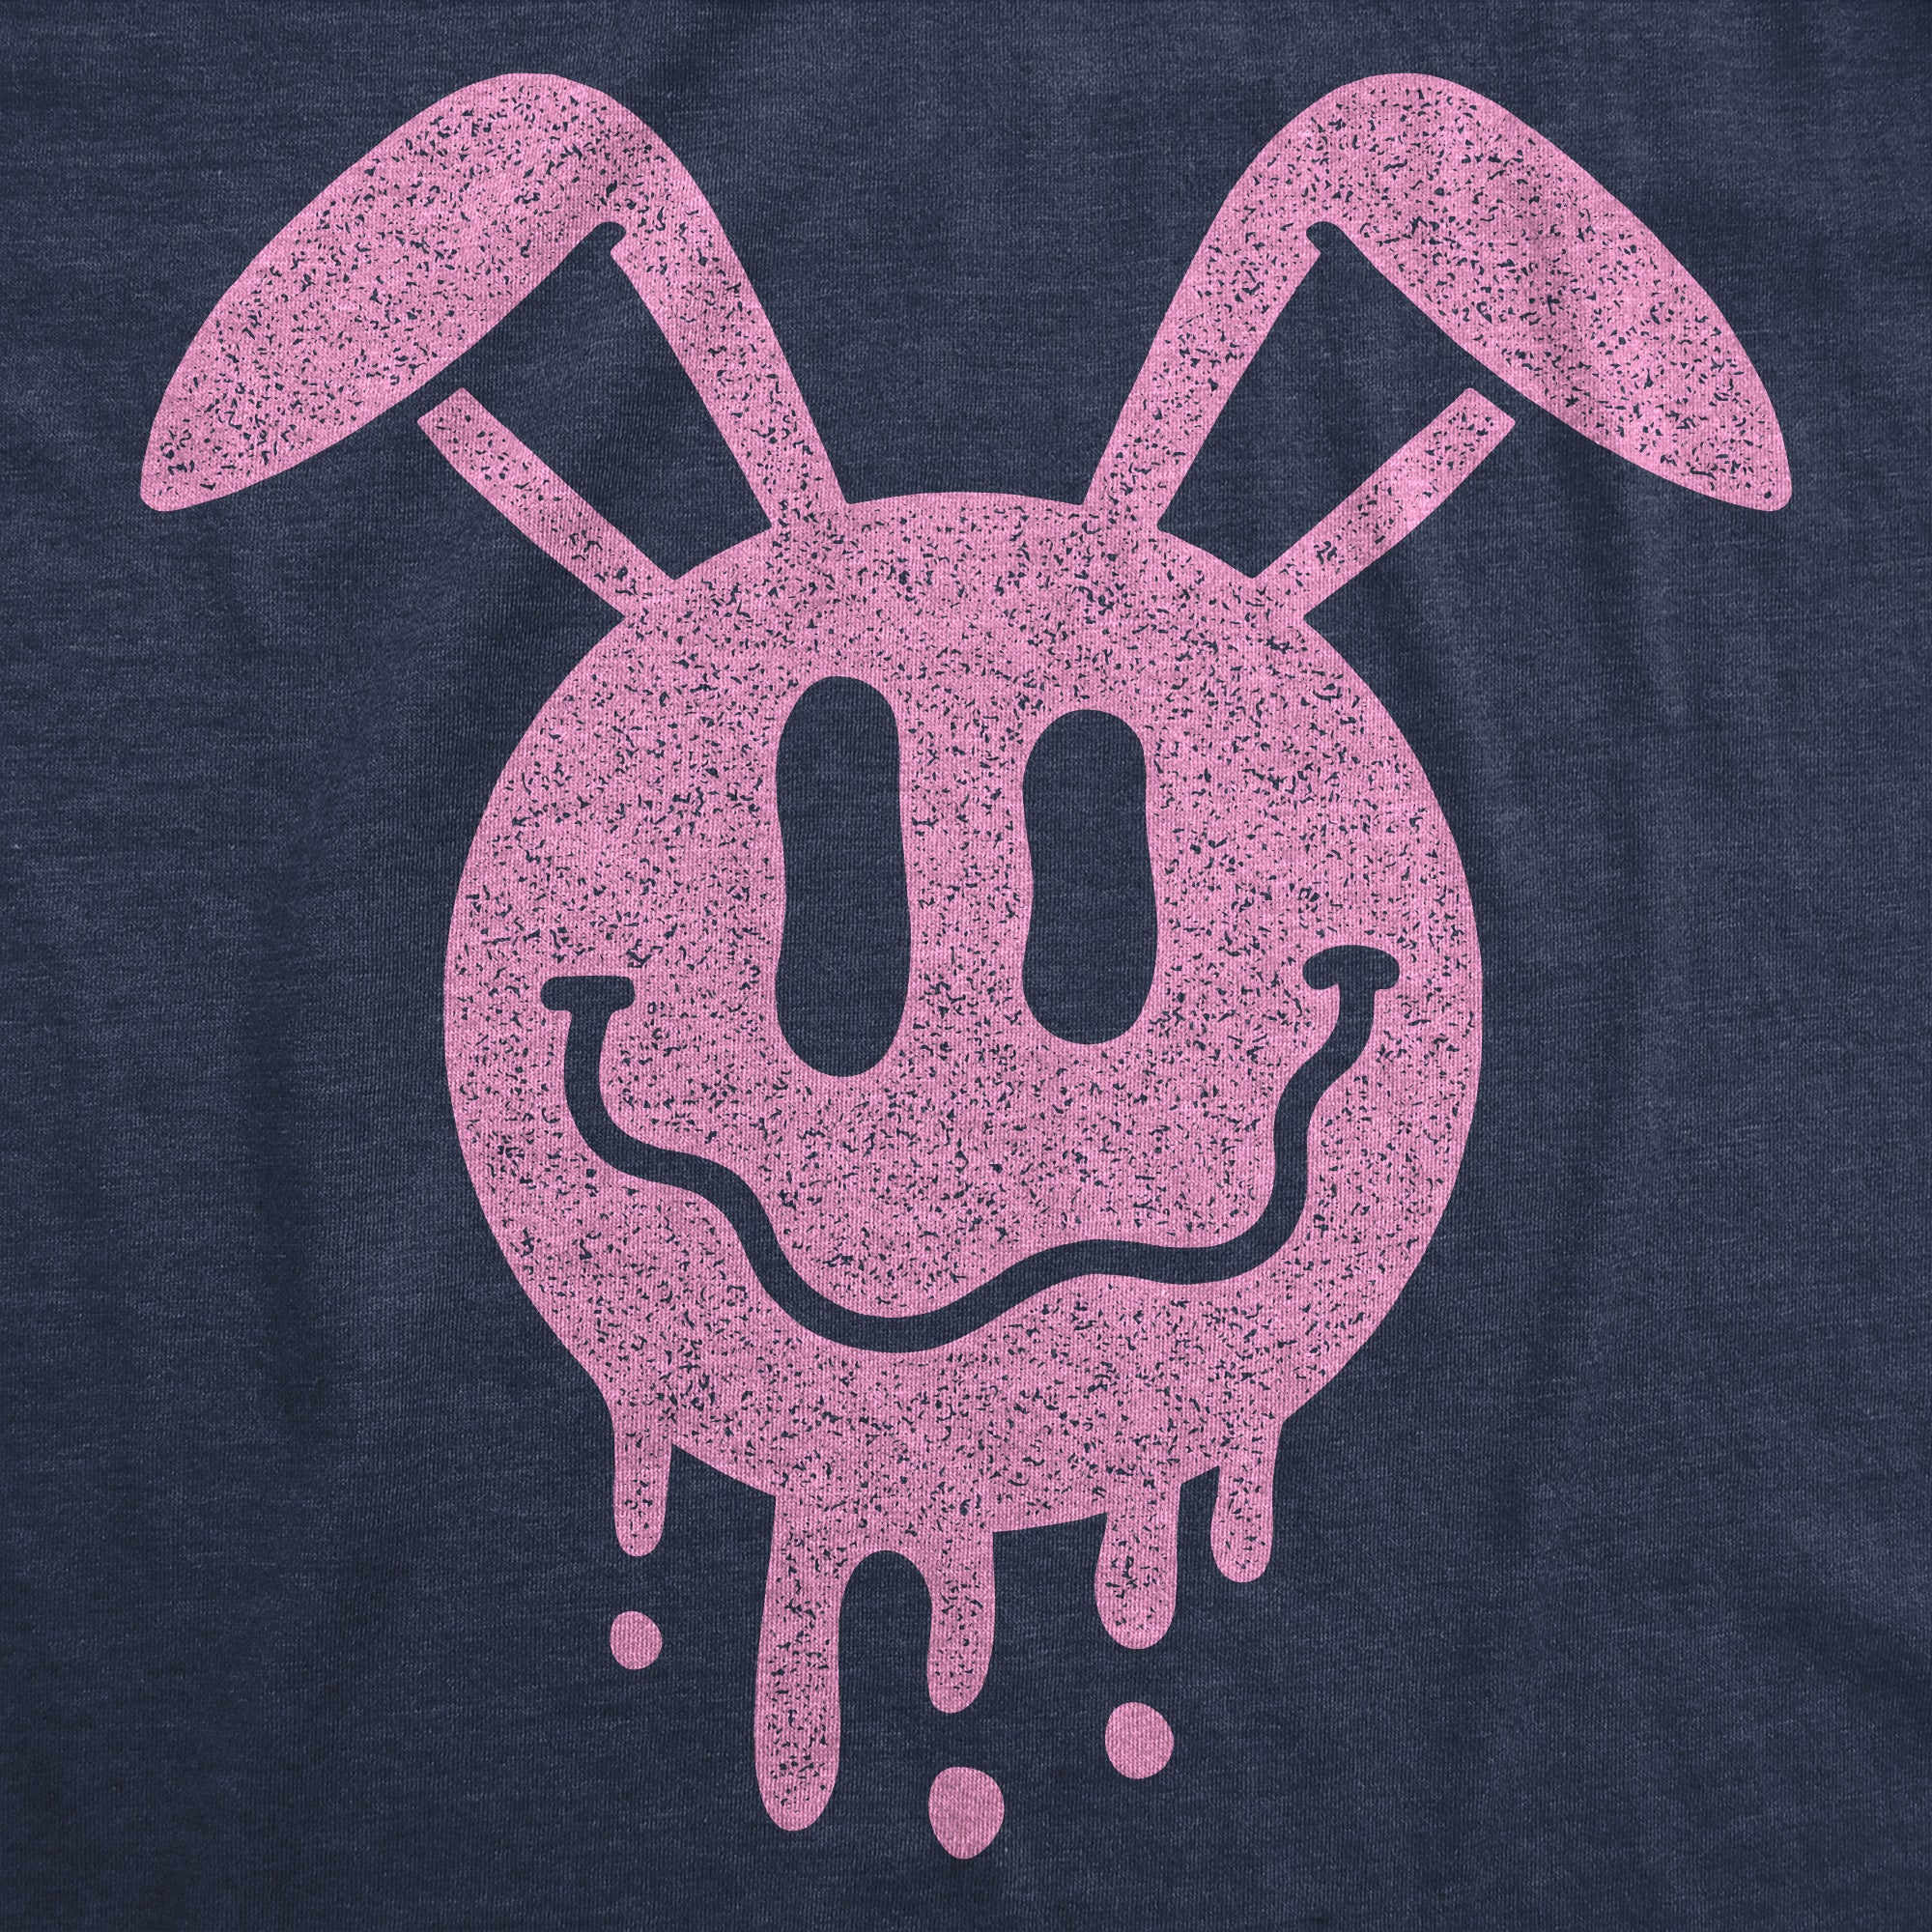 Funny Heather Navy - Dripping Easter Bunny Smile Dripping Easter Bunny Smile Womens T Shirt Nerdy Easter sarcastic Tee